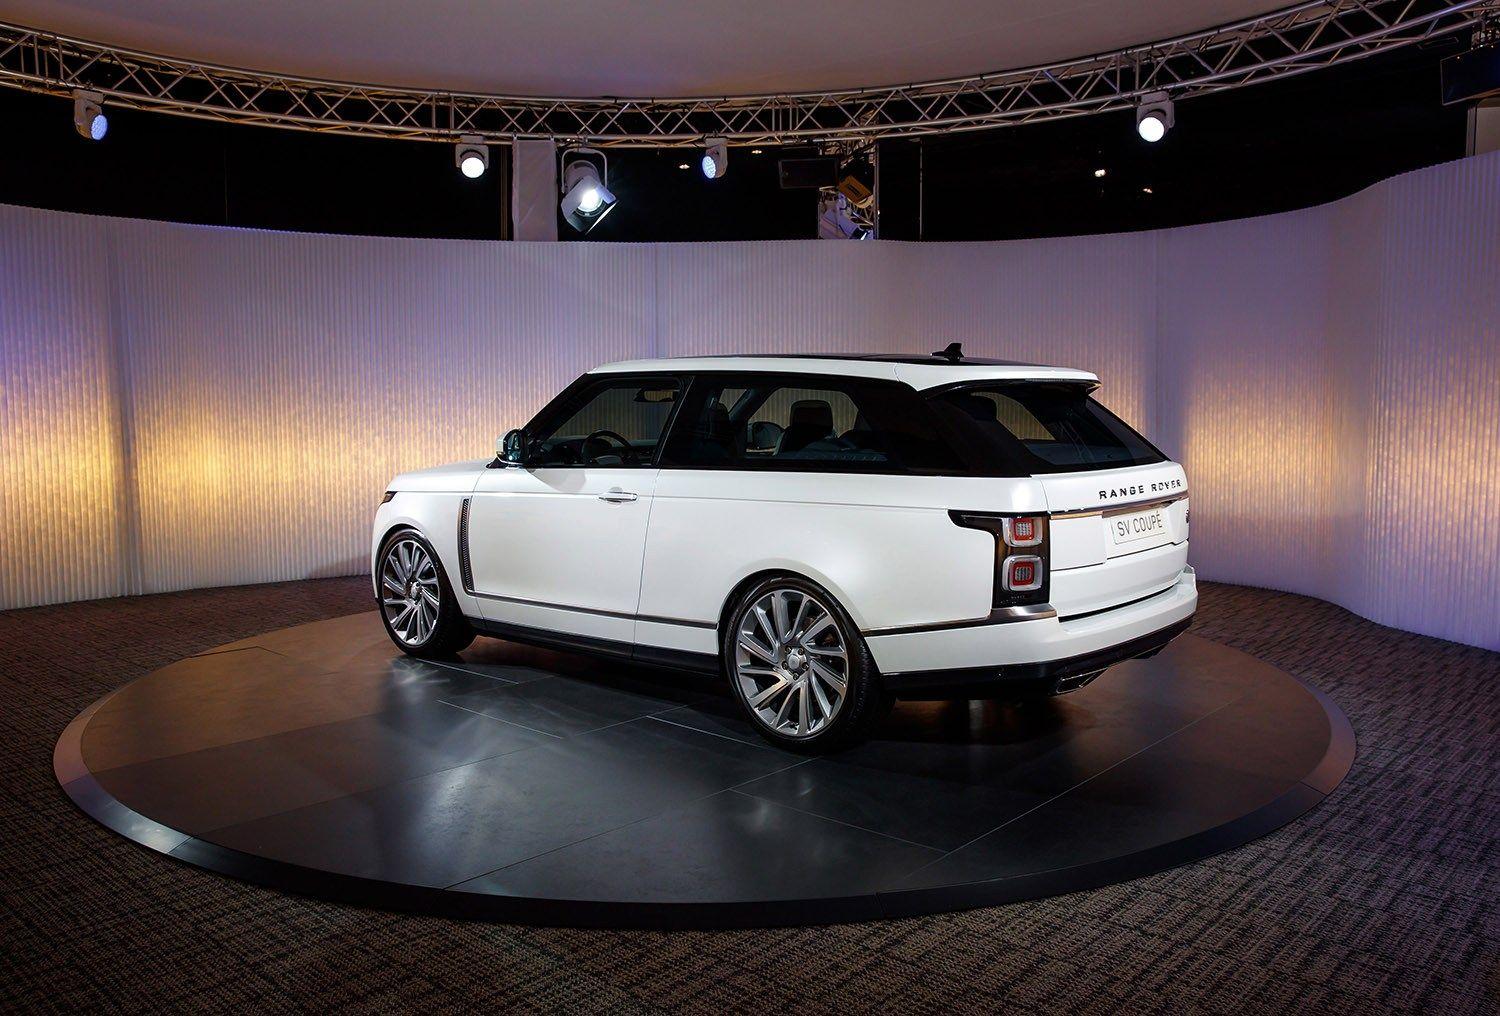 Range Rover SV Coupe debuts